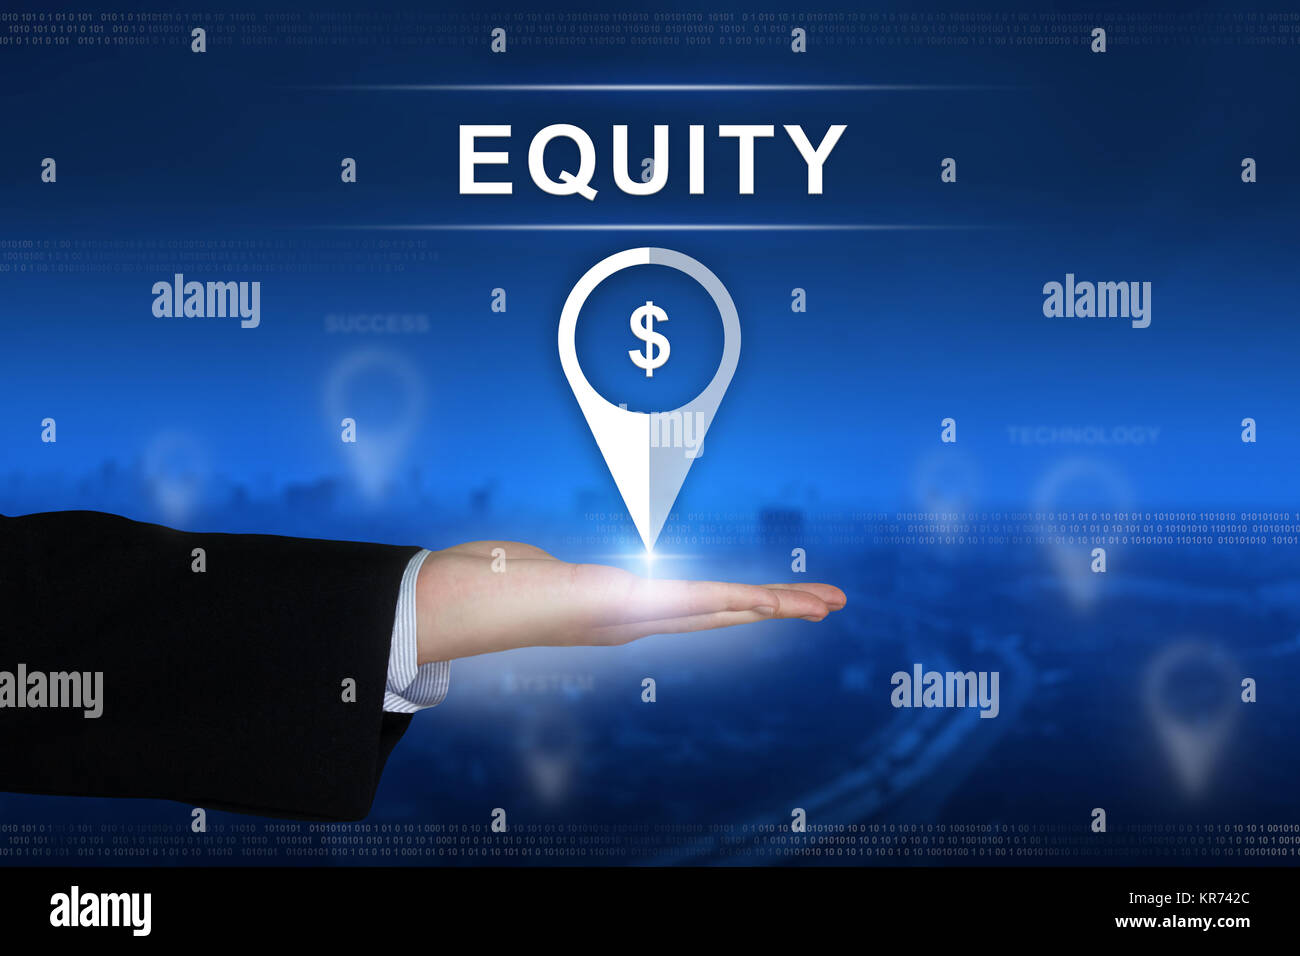 Equity button on blurred background Stock Photo